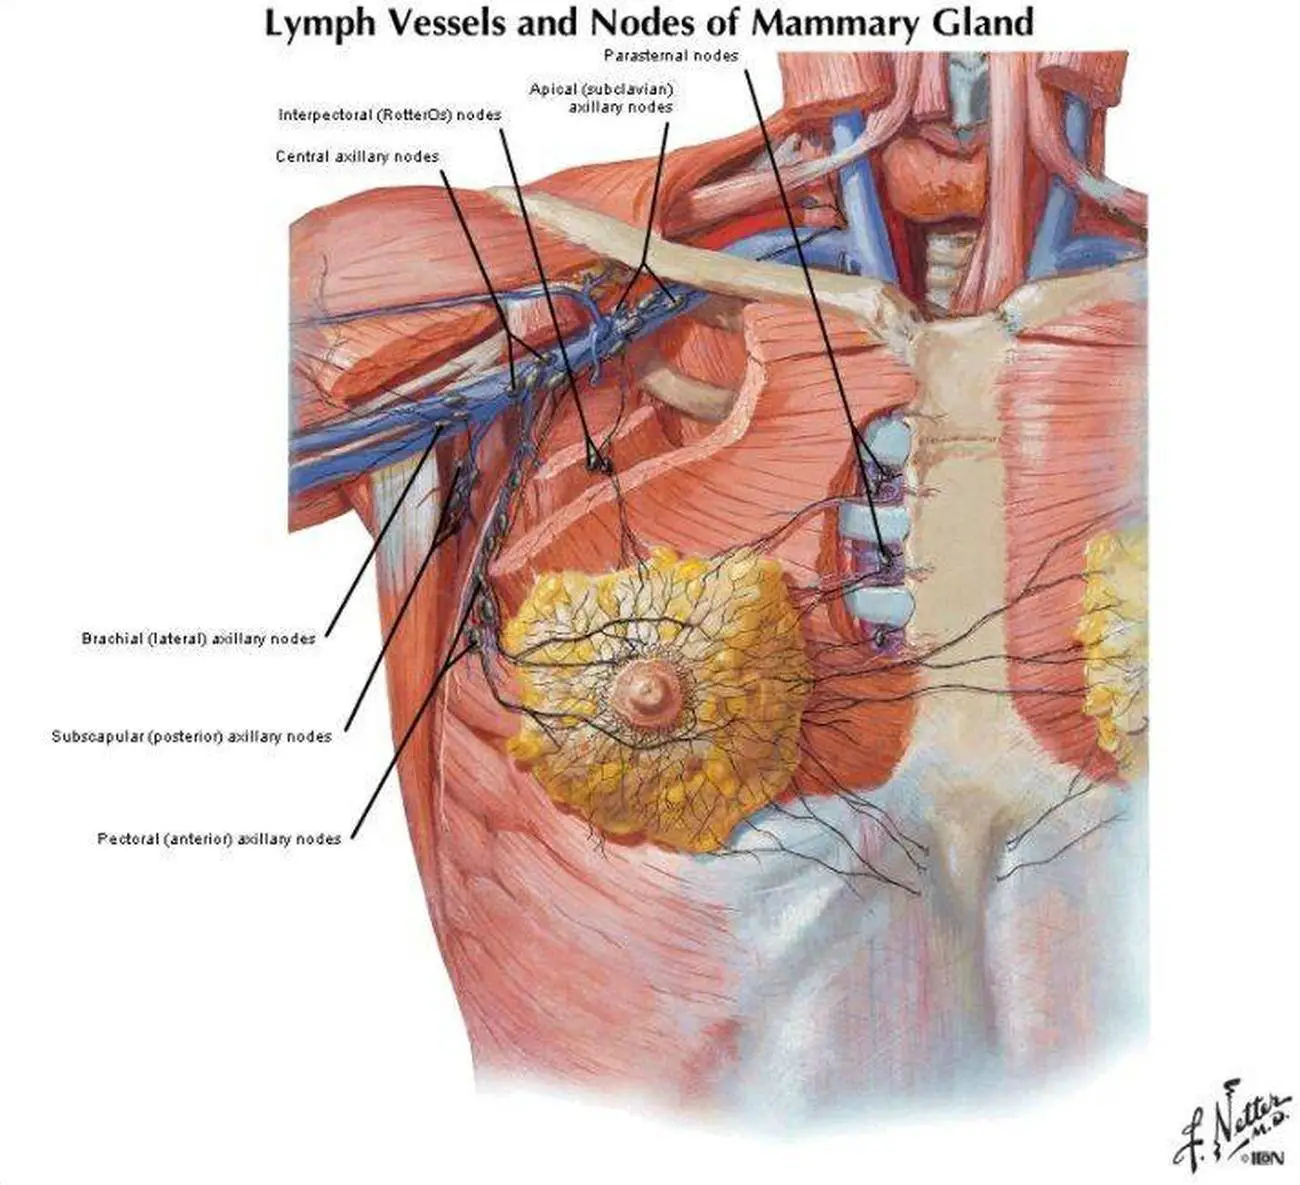 Pictures Of Axillary Lymph Nodeshealthiack